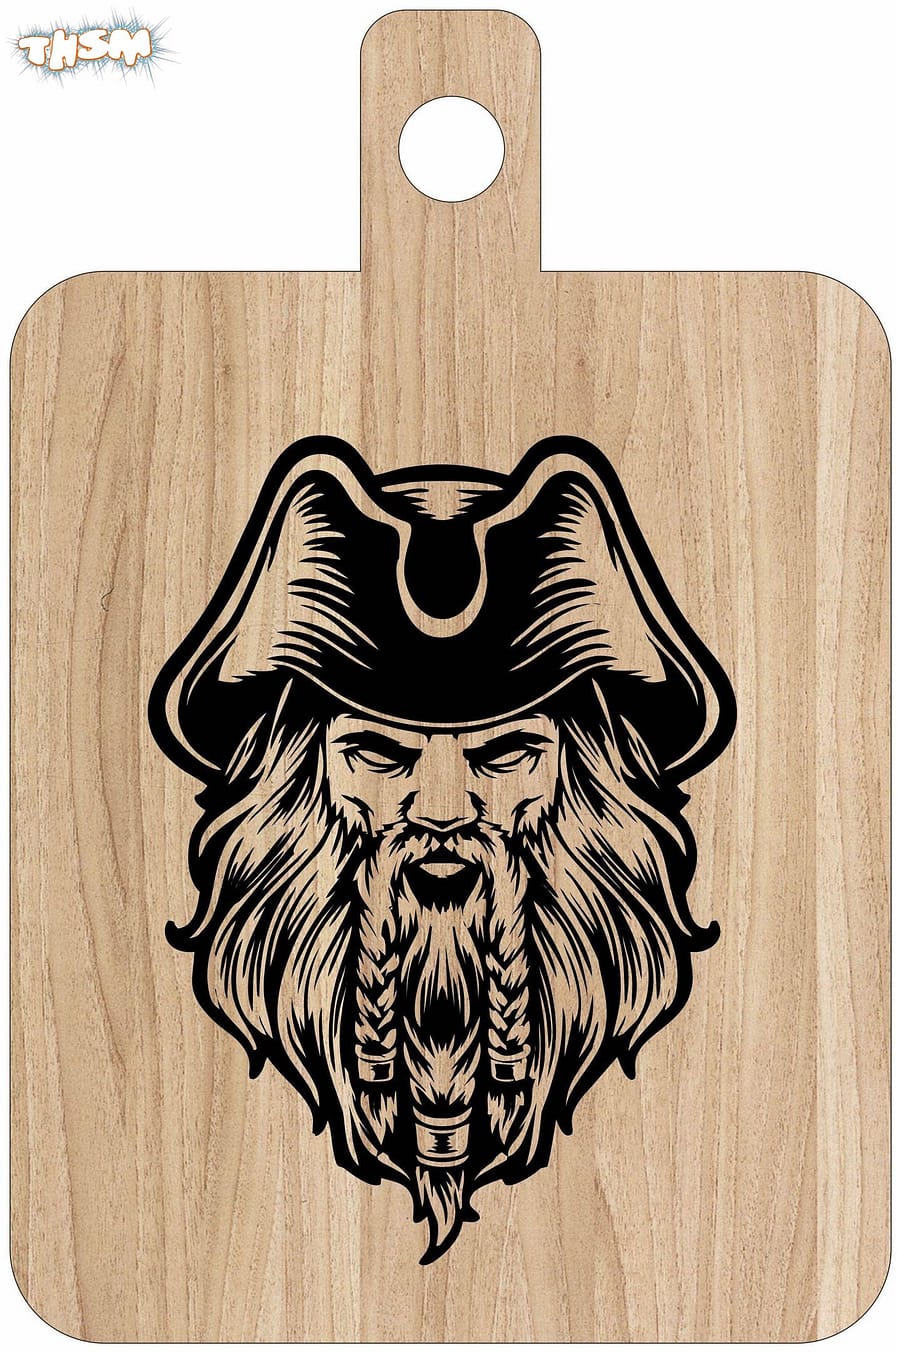 Laser Engraving Pirates Captain Art On Cutting Board Free Vector